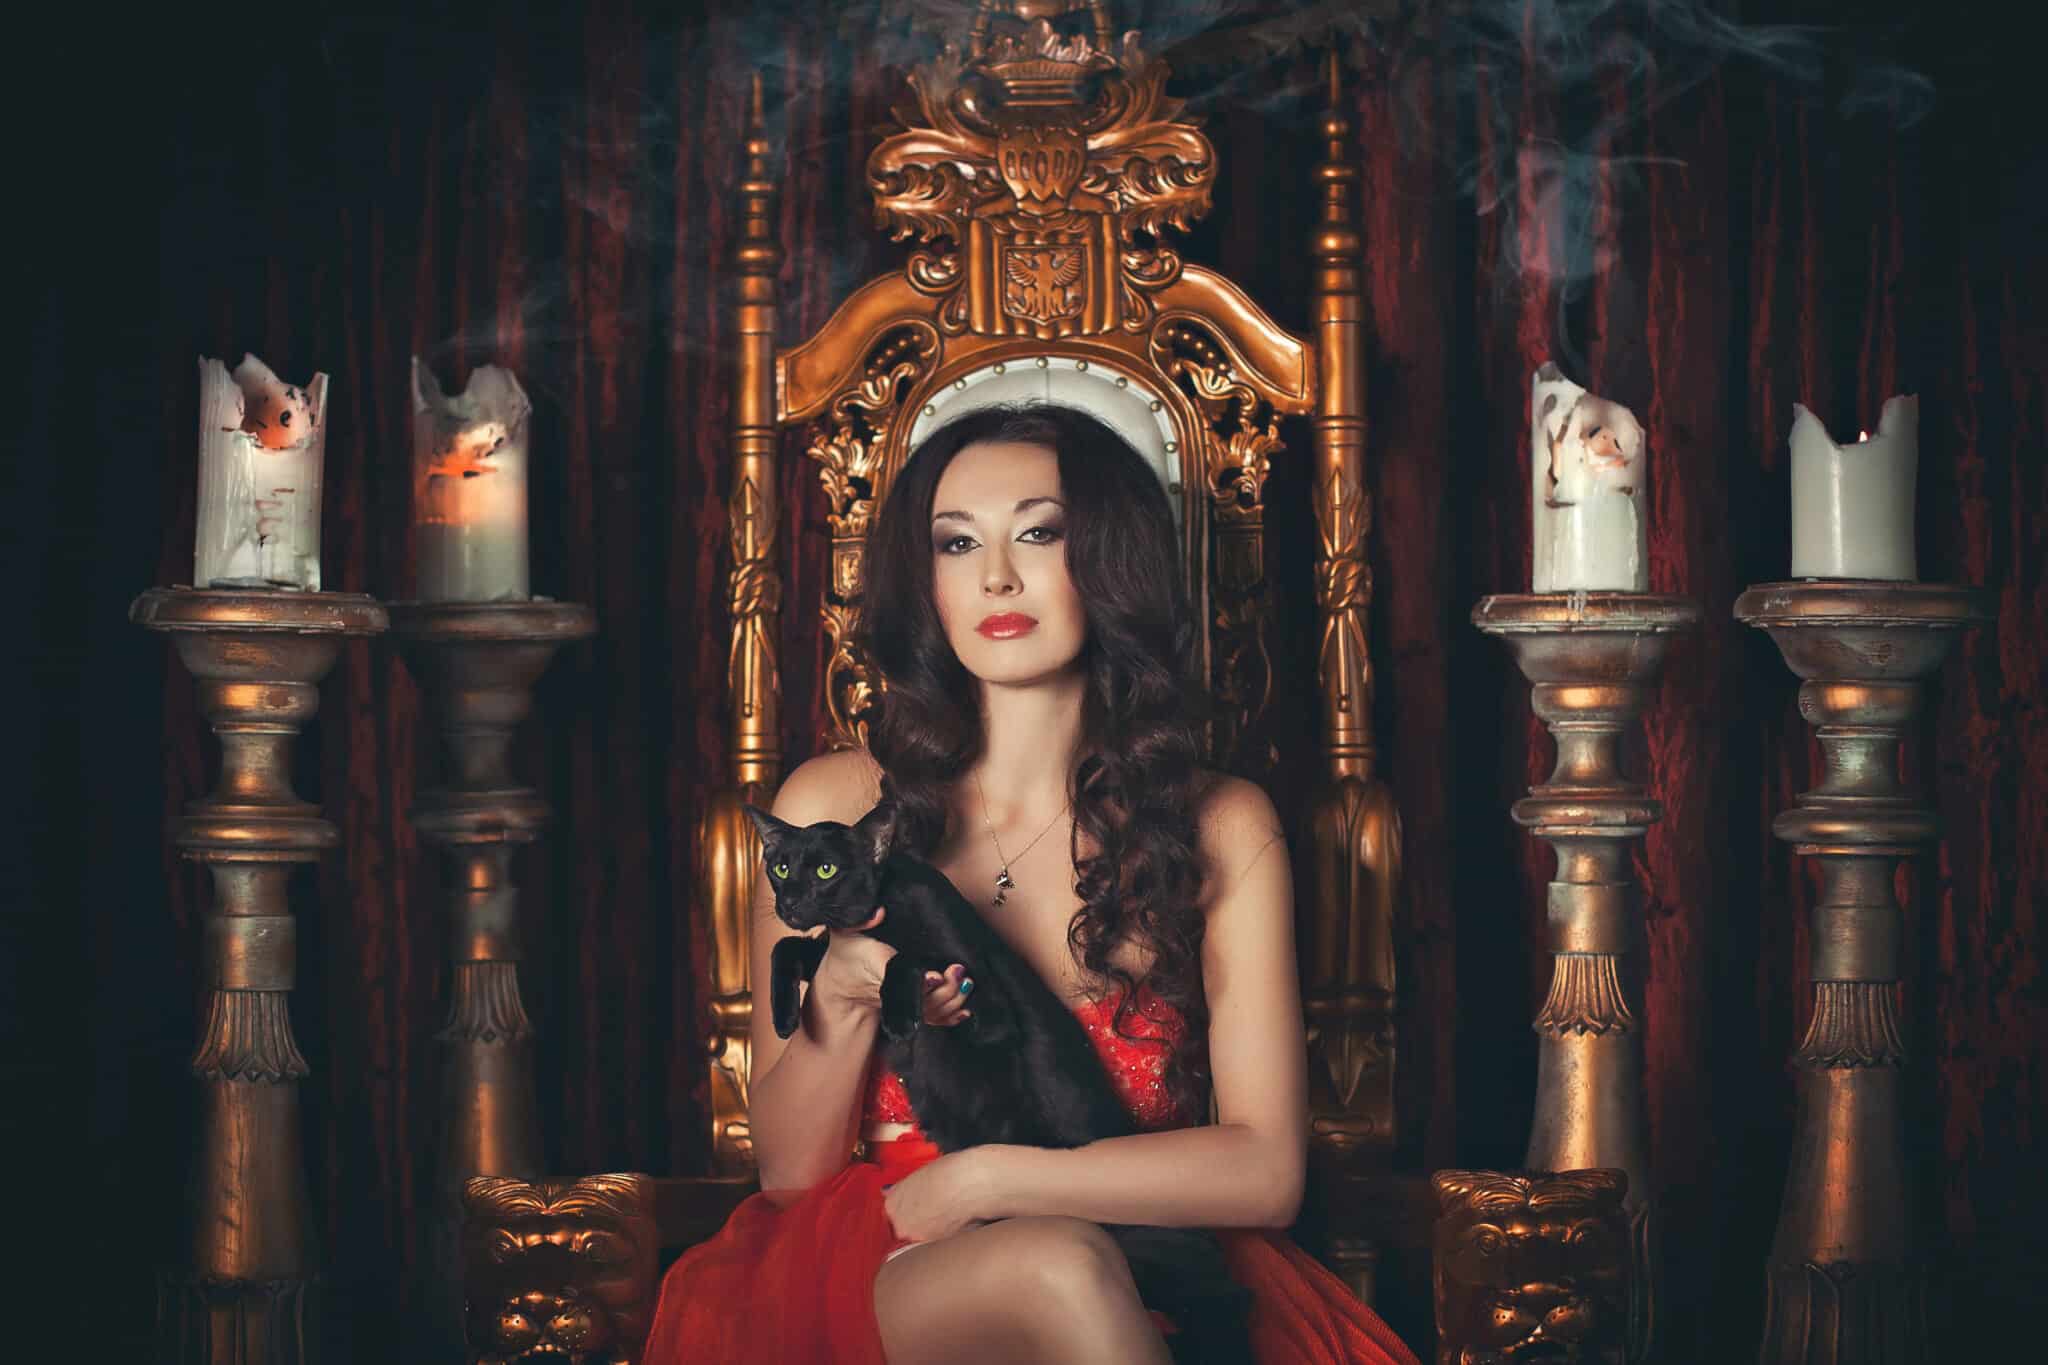 A brunette girl in a red dress sitting on a throne with a black cat in her arms against a background of candelabra with candles.